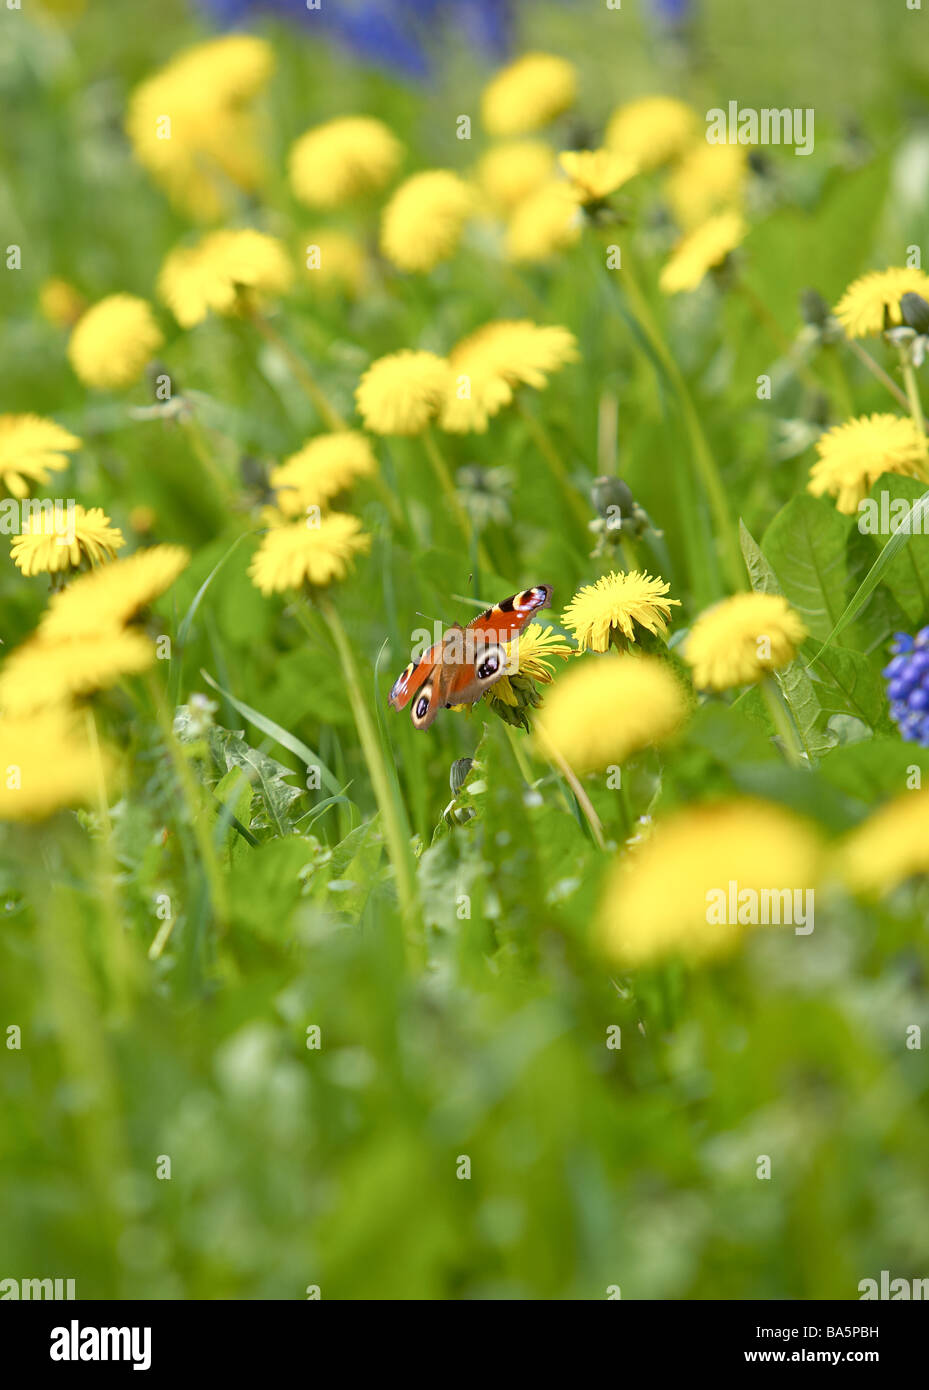 A peacock butterfly on a Dandelion photographed in a wild english garden in early spring. Stock Photo